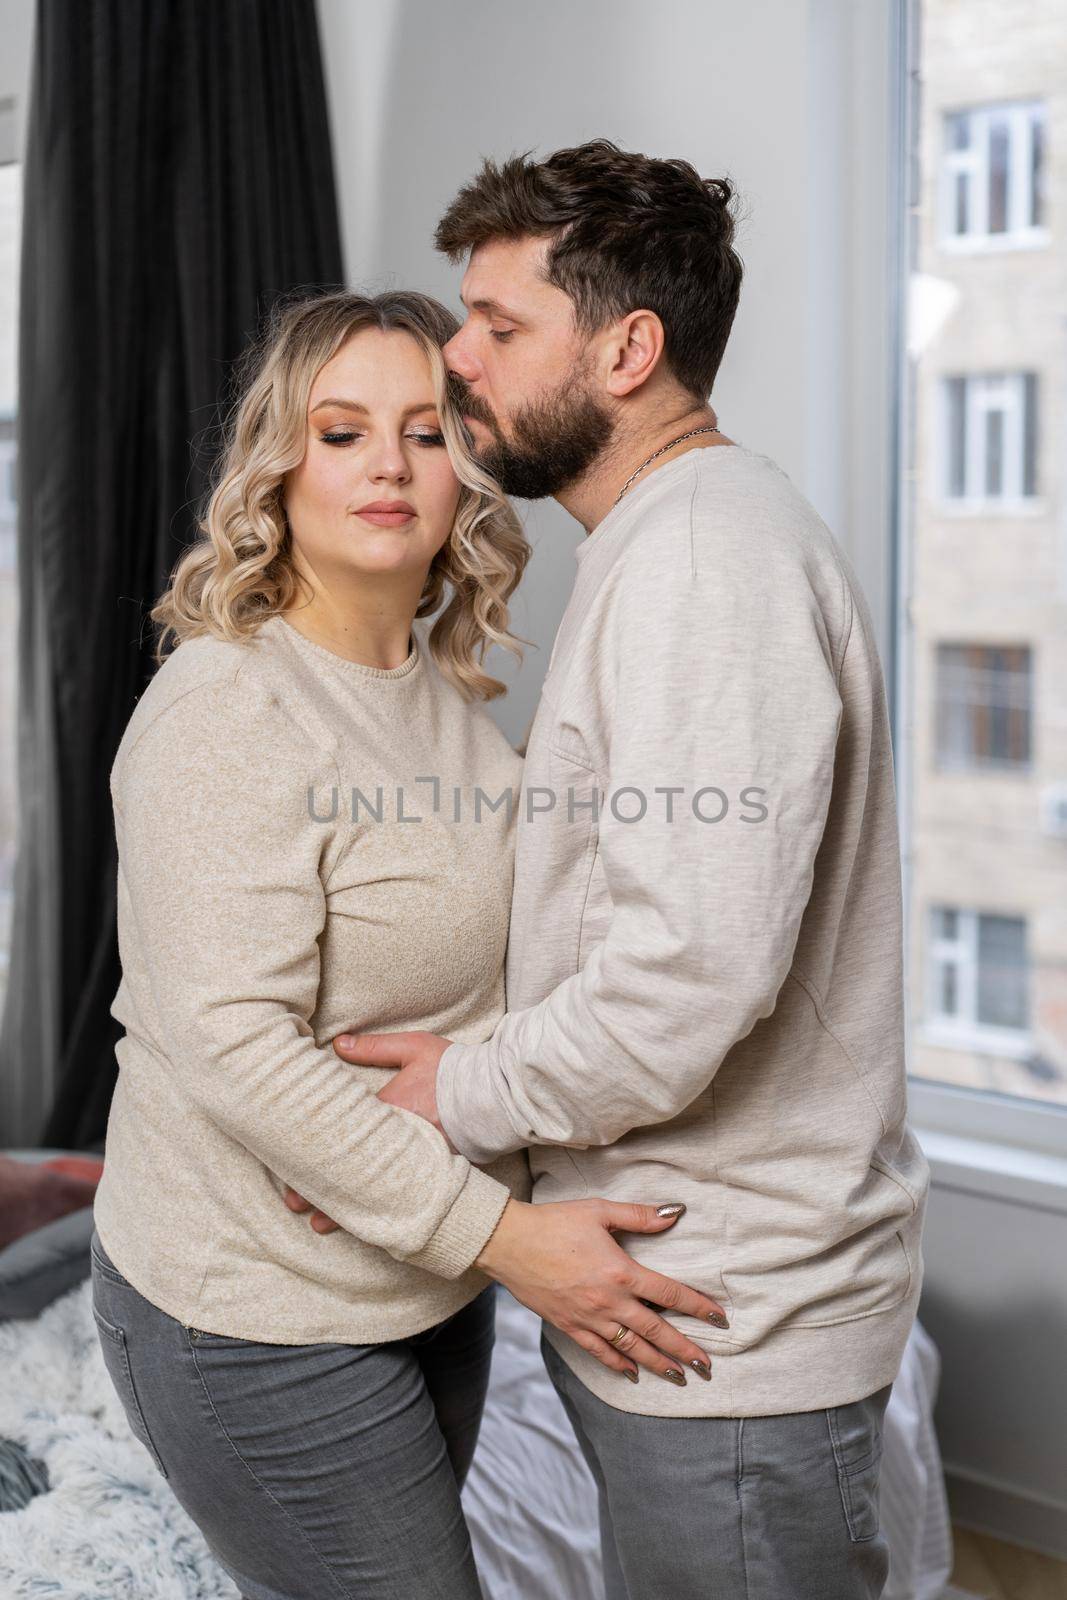 Happy family concept. Husband hug belly pregnant wife standing indoor living room near sofa Caucasian man and woman pregnancy and new life concept. Love and care